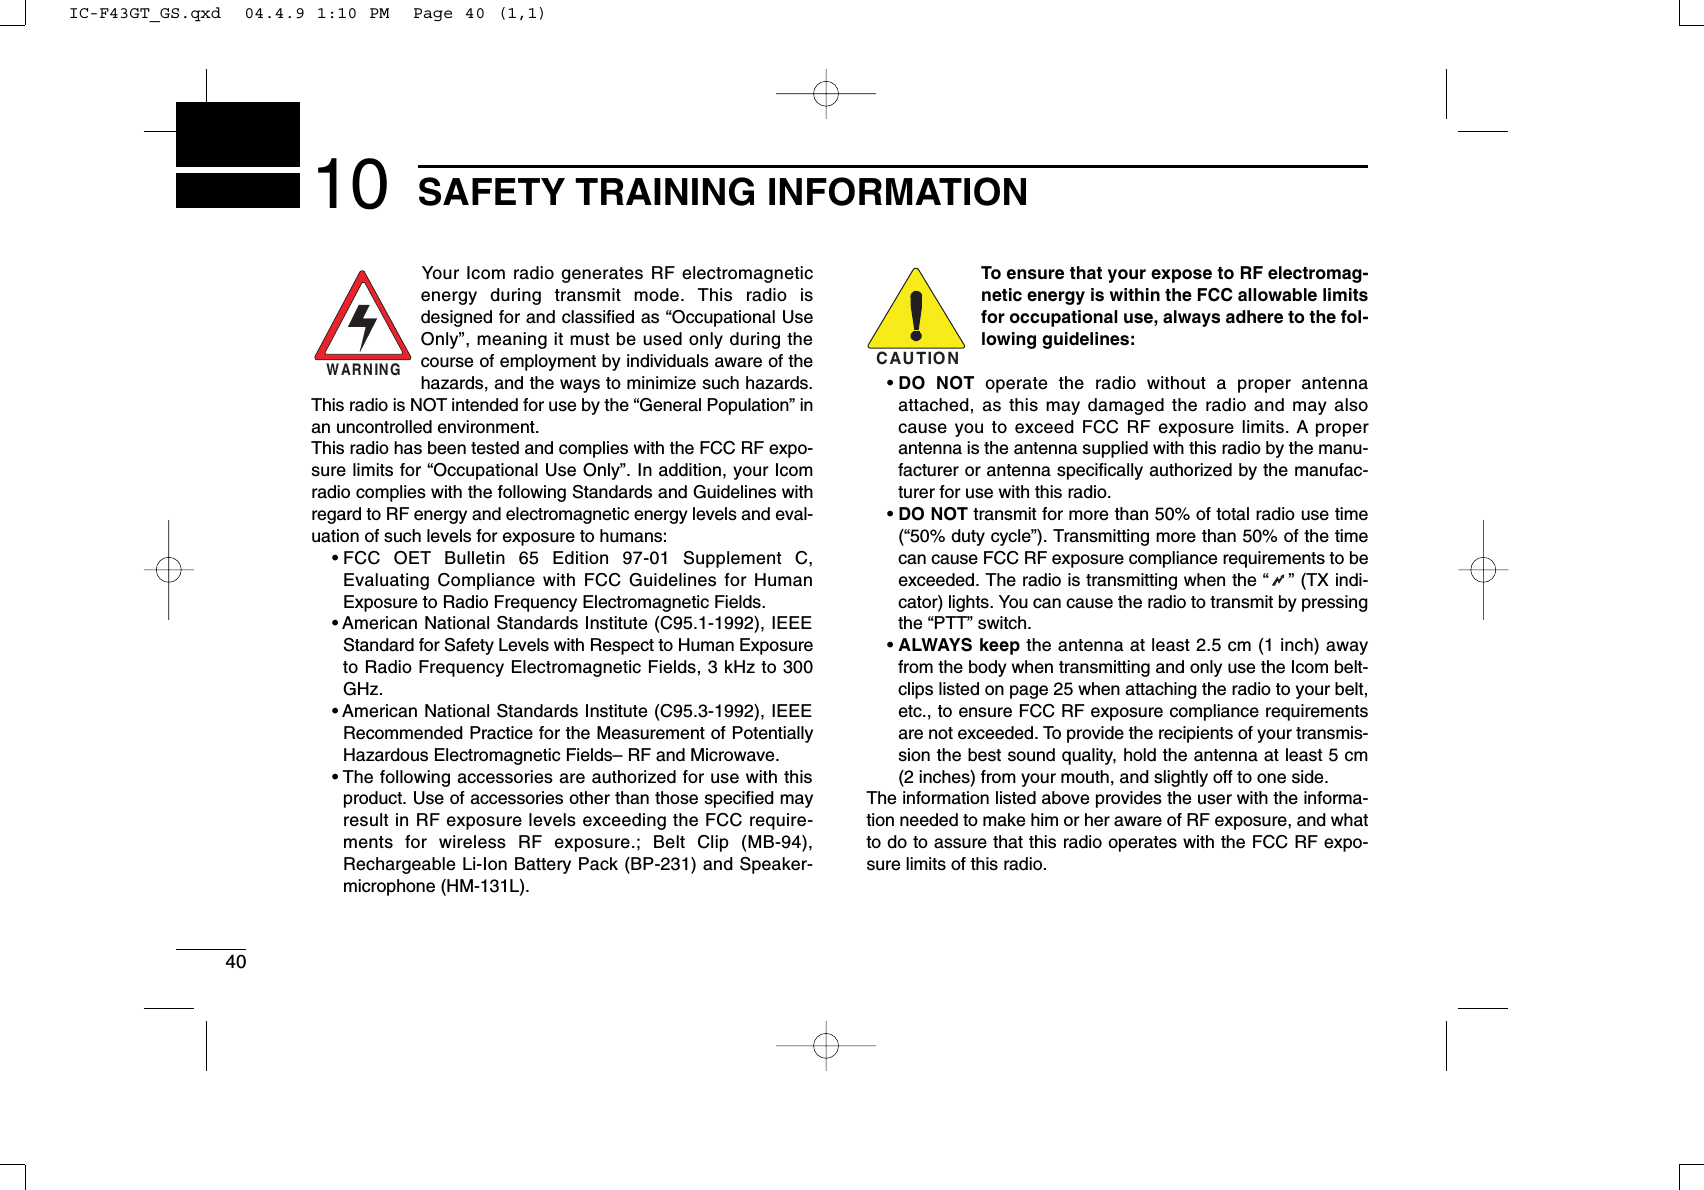 4010 SAFETY TRAINING INFORMATIONYour Icom radio generates RF electromagneticenergy during transmit mode. This radio isdesigned for and classiﬁed as “Occupational UseOnly”, meaning it must be used only during thecourse of employment by individuals aware of thehazards, and the ways to minimize such hazards.This radio is NOT intended for use by the “General Population” inan uncontrolled environment.This radio has been tested and complies with the FCC RF expo-sure limits for “Occupational Use Only”. In addition, your Icomradio complies with the following Standards and Guidelines withregard to RF energy and electromagnetic energy levels and eval-uation of such levels for exposure to humans:• FCC OET Bulletin 65 Edition 97-01 Supplement C,Evaluating Compliance with FCC Guidelines for HumanExposure to Radio Frequency Electromagnetic Fields.• American National Standards Institute (C95.1-1992), IEEEStandard for Safety Levels with Respect to Human Exposureto Radio Frequency Electromagnetic Fields, 3 kHz to 300GHz.• American National Standards Institute (C95.3-1992), IEEERecommended Practice for the Measurement of PotentiallyHazardous Electromagnetic Fields– RF and Microwave.• The following accessories are authorized for use with thisproduct. Use of accessories other than those speciﬁed mayresult in RF exposure levels exceeding the FCC require-ments for wireless RF exposure.; Belt Clip (MB-94),Rechargeable Li-Ion Battery Pack (BP-231) and Speaker-microphone (HM-131L).To ensure that your expose to RF electromag-netic energy is within the FCC allowable limitsfor occupational use, always adhere to the fol-lowing guidelines:• DO NOT operate the radio without a proper antennaattached, as this may damaged the radio and may alsocause you to exceed FCC RF exposure limits. A properantenna is the antenna supplied with this radio by the manu-facturer or antenna speciﬁcally authorized by the manufac-turer for use with this radio.• DO NOT transmit for more than 50% of total radio use time(“50% duty cycle”). Transmitting more than 50% of the timecan cause FCC RF exposure compliance requirements to beexceeded. The radio is transmitting when the “” (TX indi-cator) lights. You can cause the radio to transmit by pressingthe “PTT” switch.• ALWAYS keep the antenna at least 2.5 cm (1 inch) awayfrom the body when transmitting and only use the Icom belt-clips listed on page 25 when attaching the radio to your belt,etc., to ensure FCC RF exposure compliance requirementsare not exceeded. To provide the recipients of your transmis-sion the best sound quality, hold the antenna at least 5 cm(2 inches) from your mouth, and slightly off to one side.The information listed above provides the user with the informa-tion needed to make him or her aware of RF exposure, and whatto do to assure that this radio operates with the FCC RF expo-sure limits of this radio.CAUTIONWARNINGIC-F43GT_GS.qxd  04.4.9 1:10 PM  Page 40 (1,1)